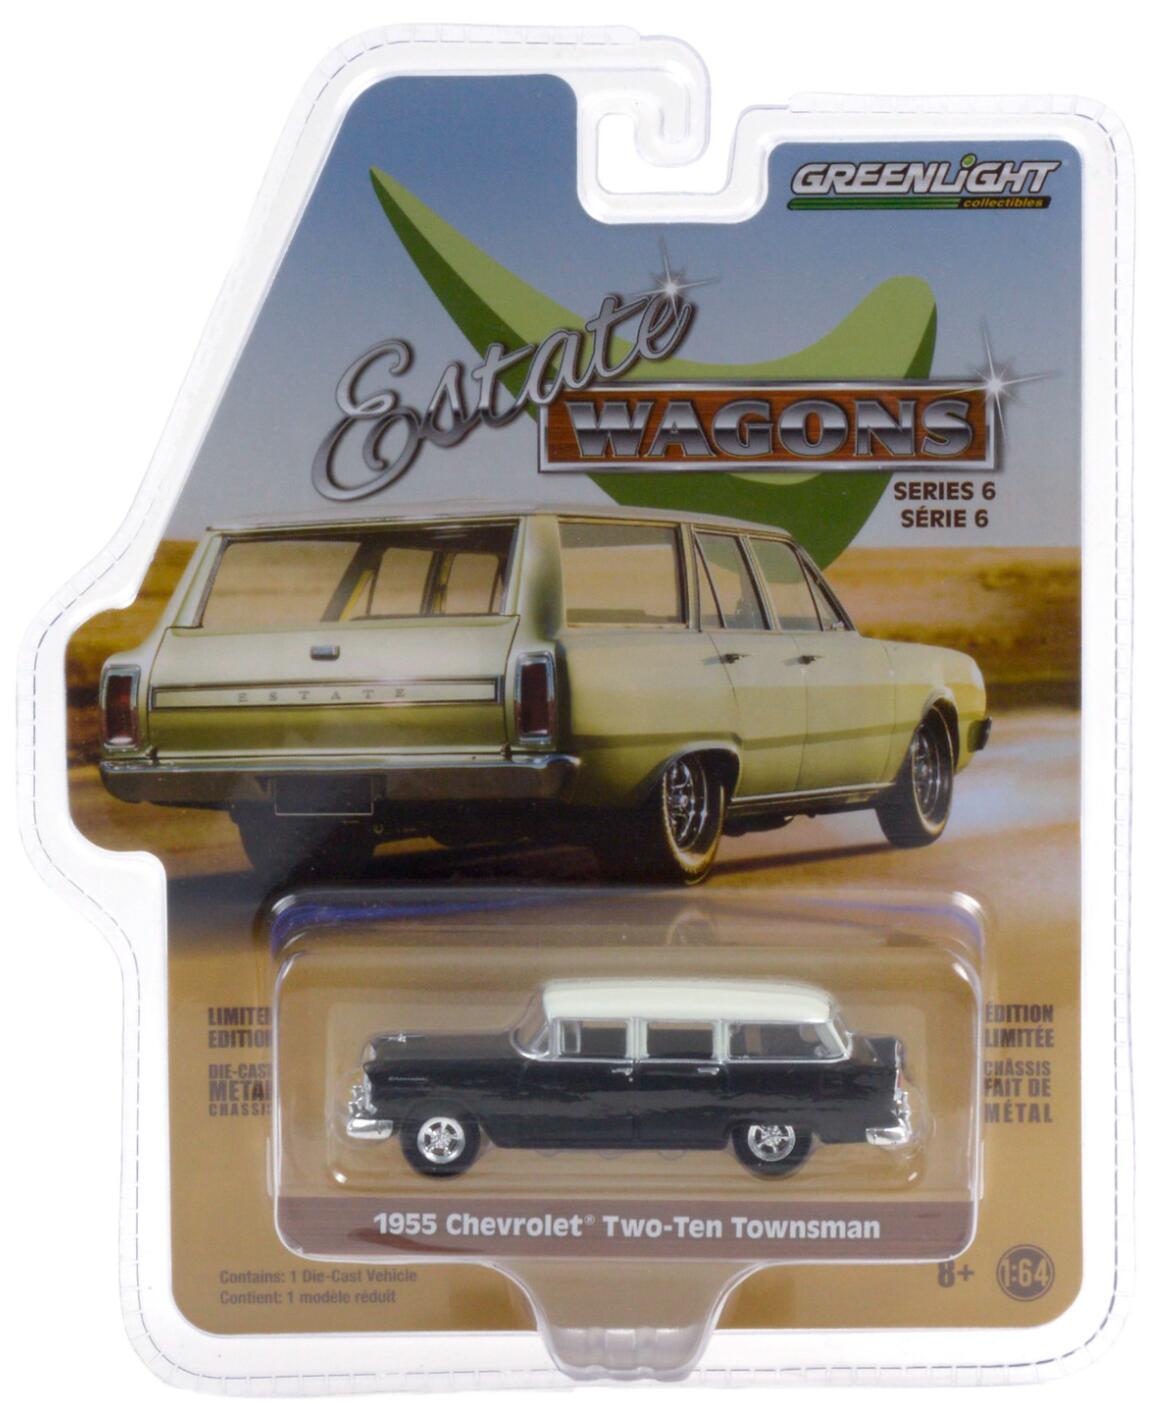 GreenLight 1:64 Estate Wagons Series 6 - 1955 Chevrolet Two-Ten Townsman - Flat Black and India Ivory 36010-A